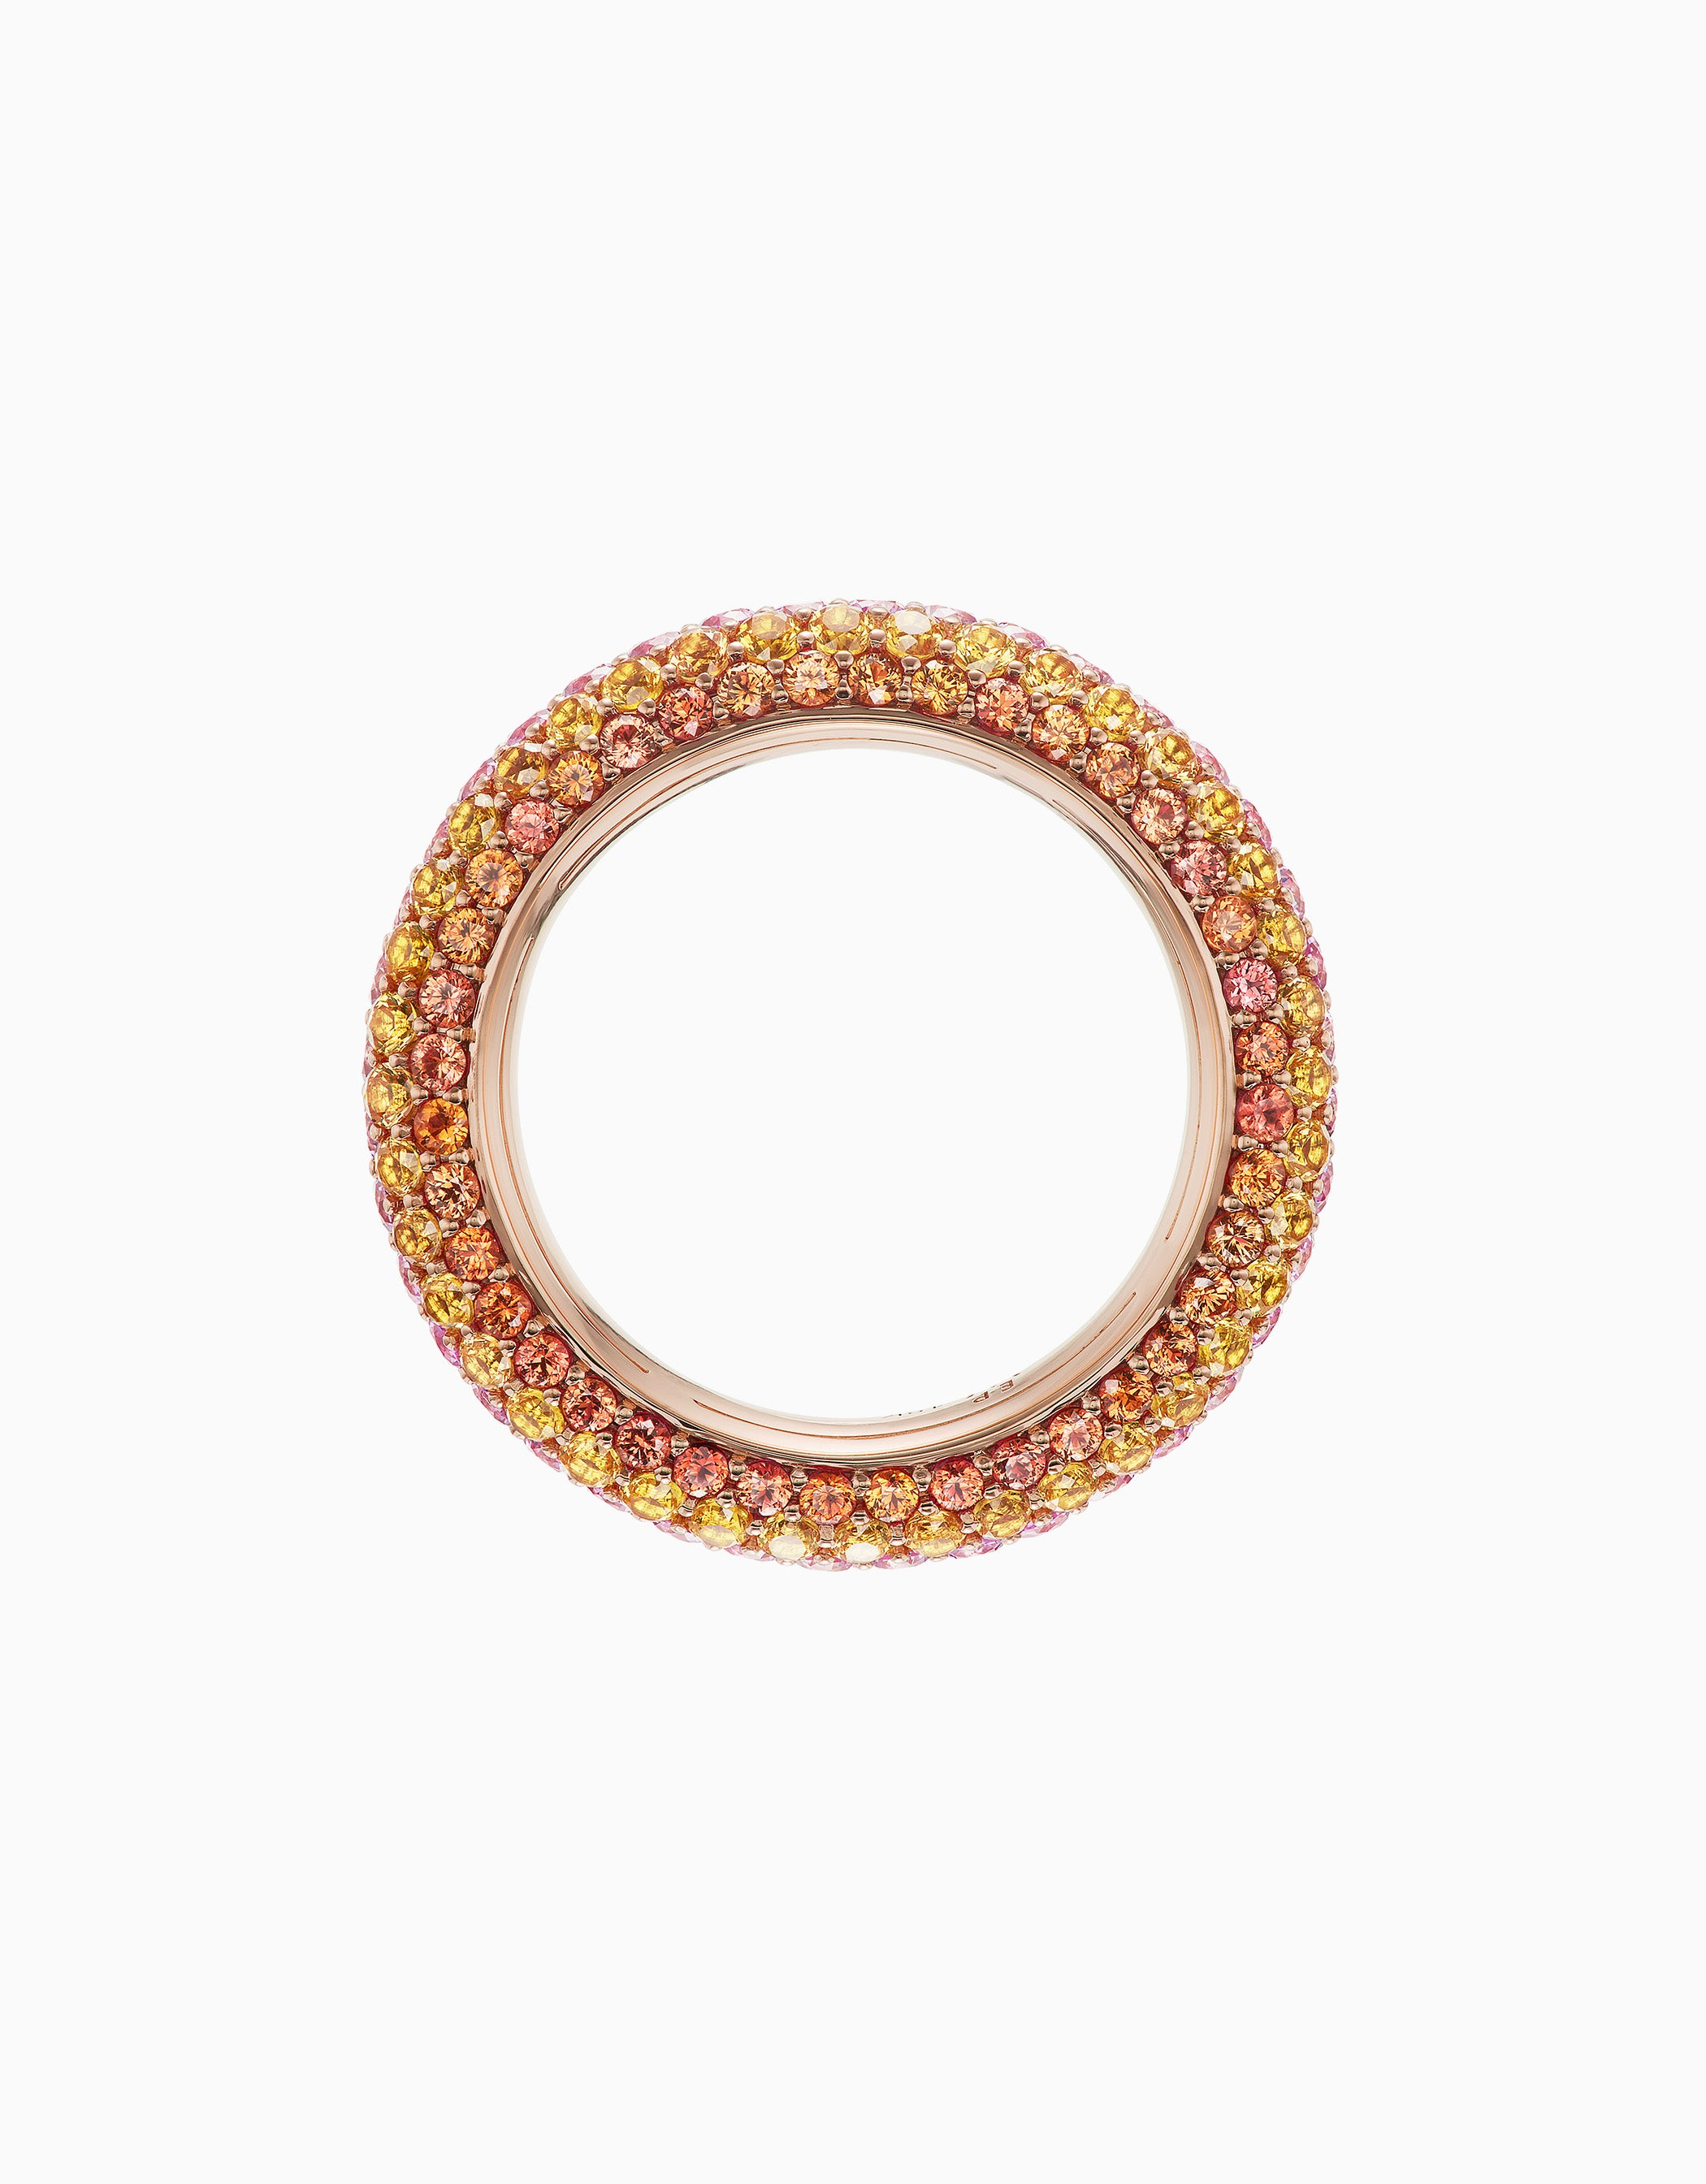 DESERT PUFFY BAND RING - PINK AND ORANGE SAPPHIRES